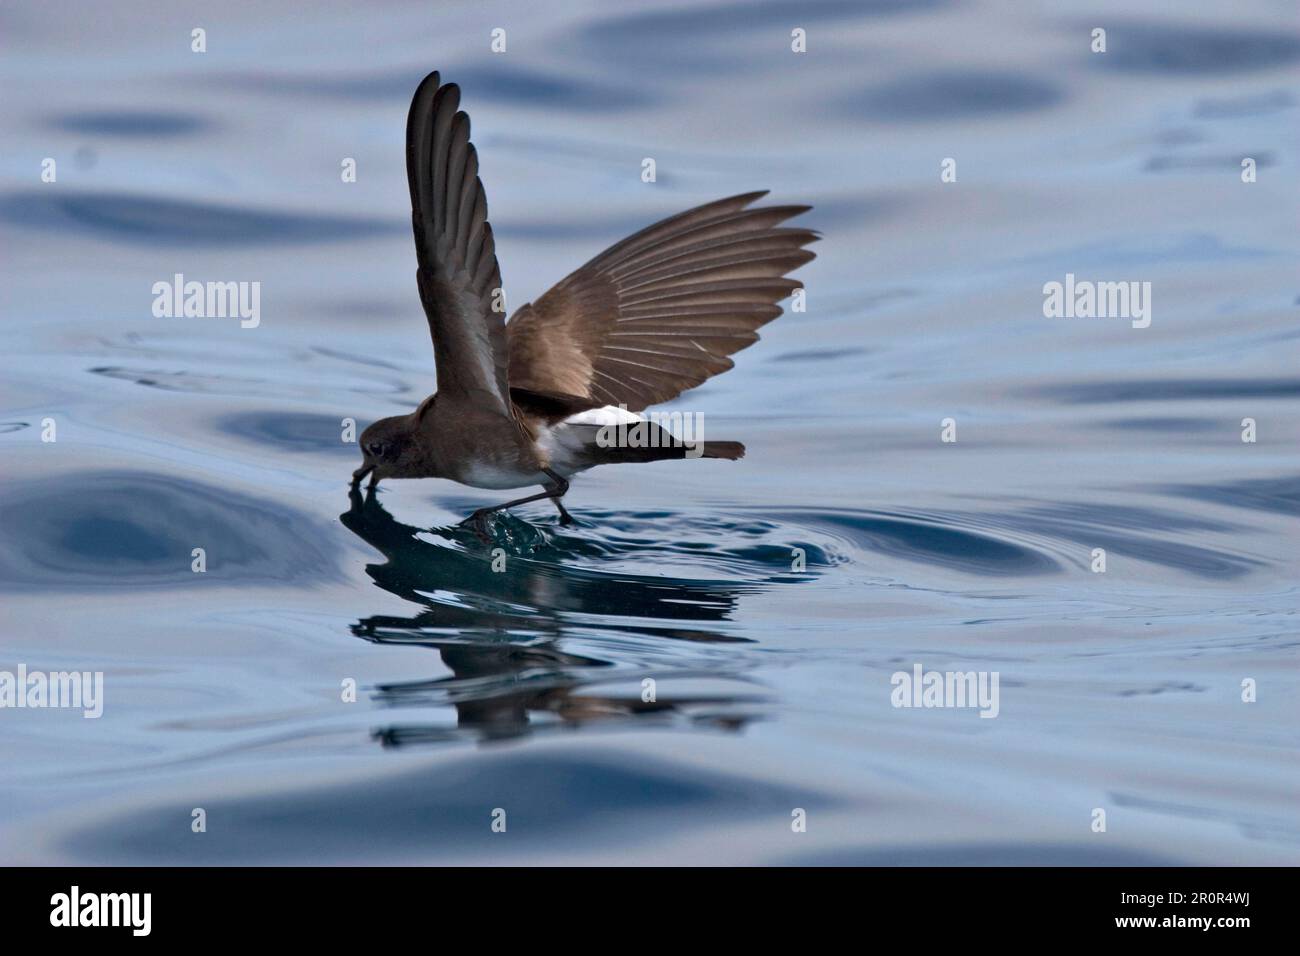 Elliot's or White Ventilated Storm Petrels Dance on the Sea Stock Photo